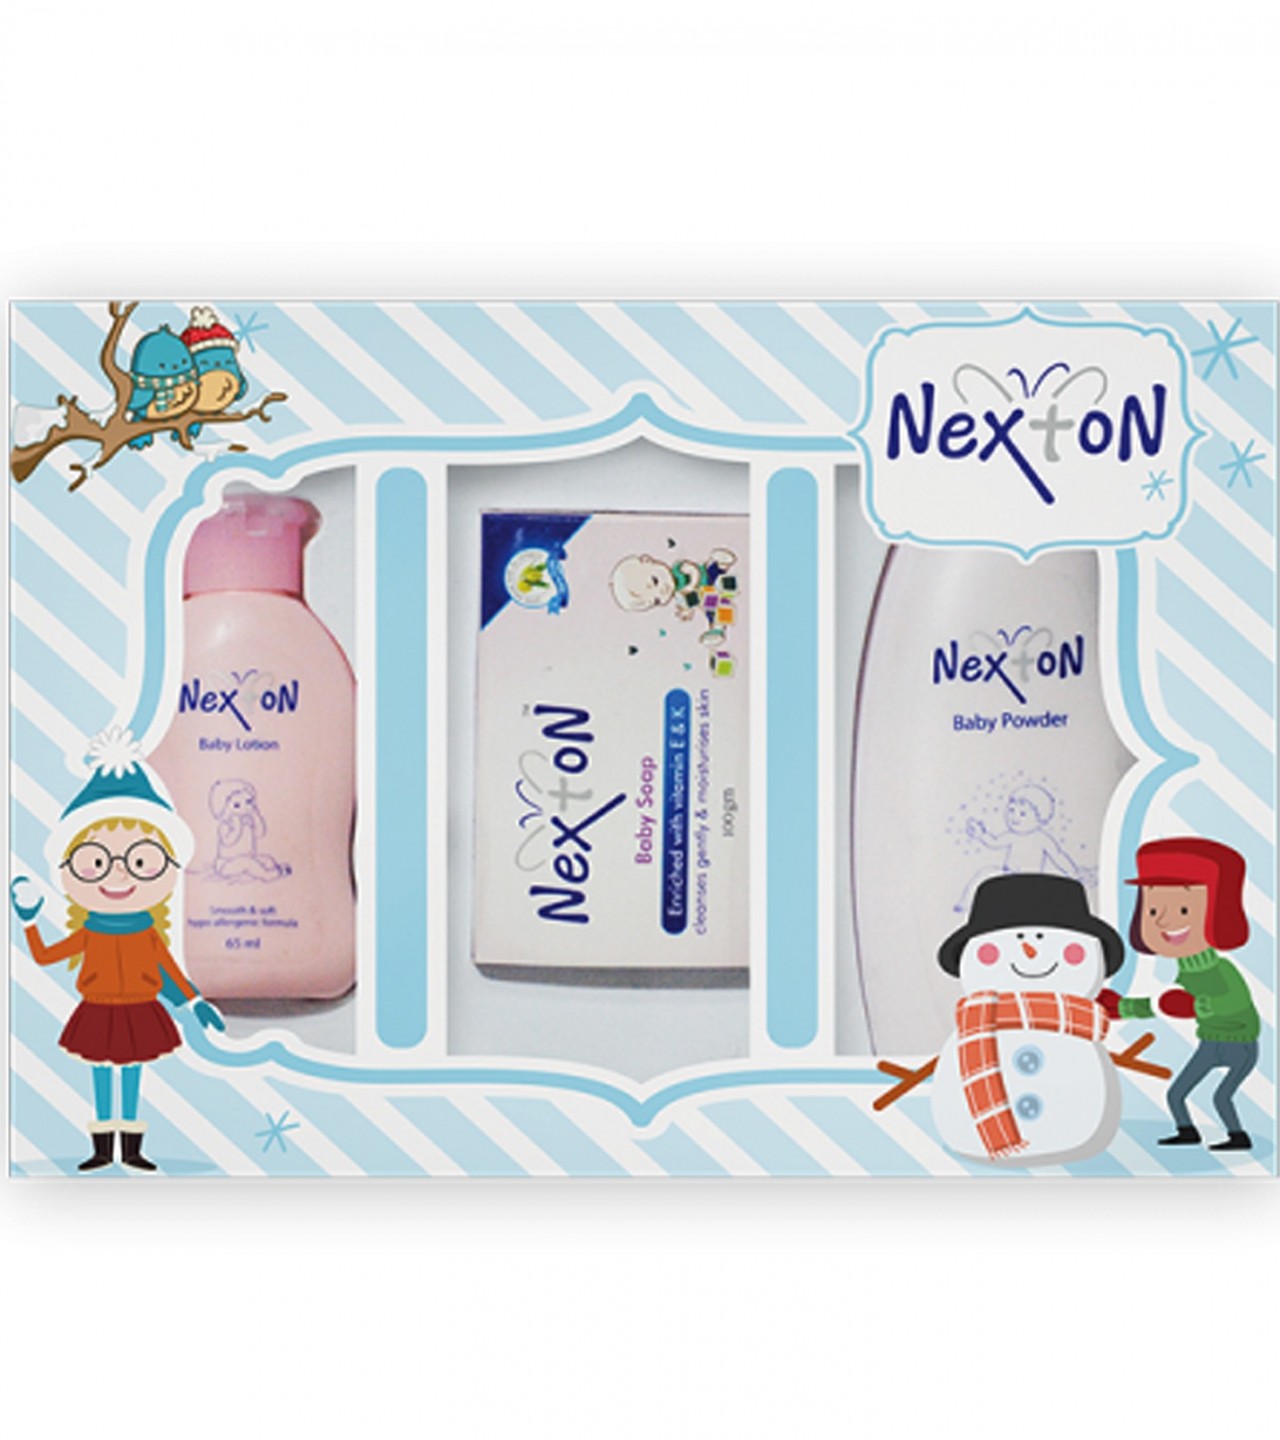 Nexton 3 in 1 Baby Gift Pack (NGS 92208)